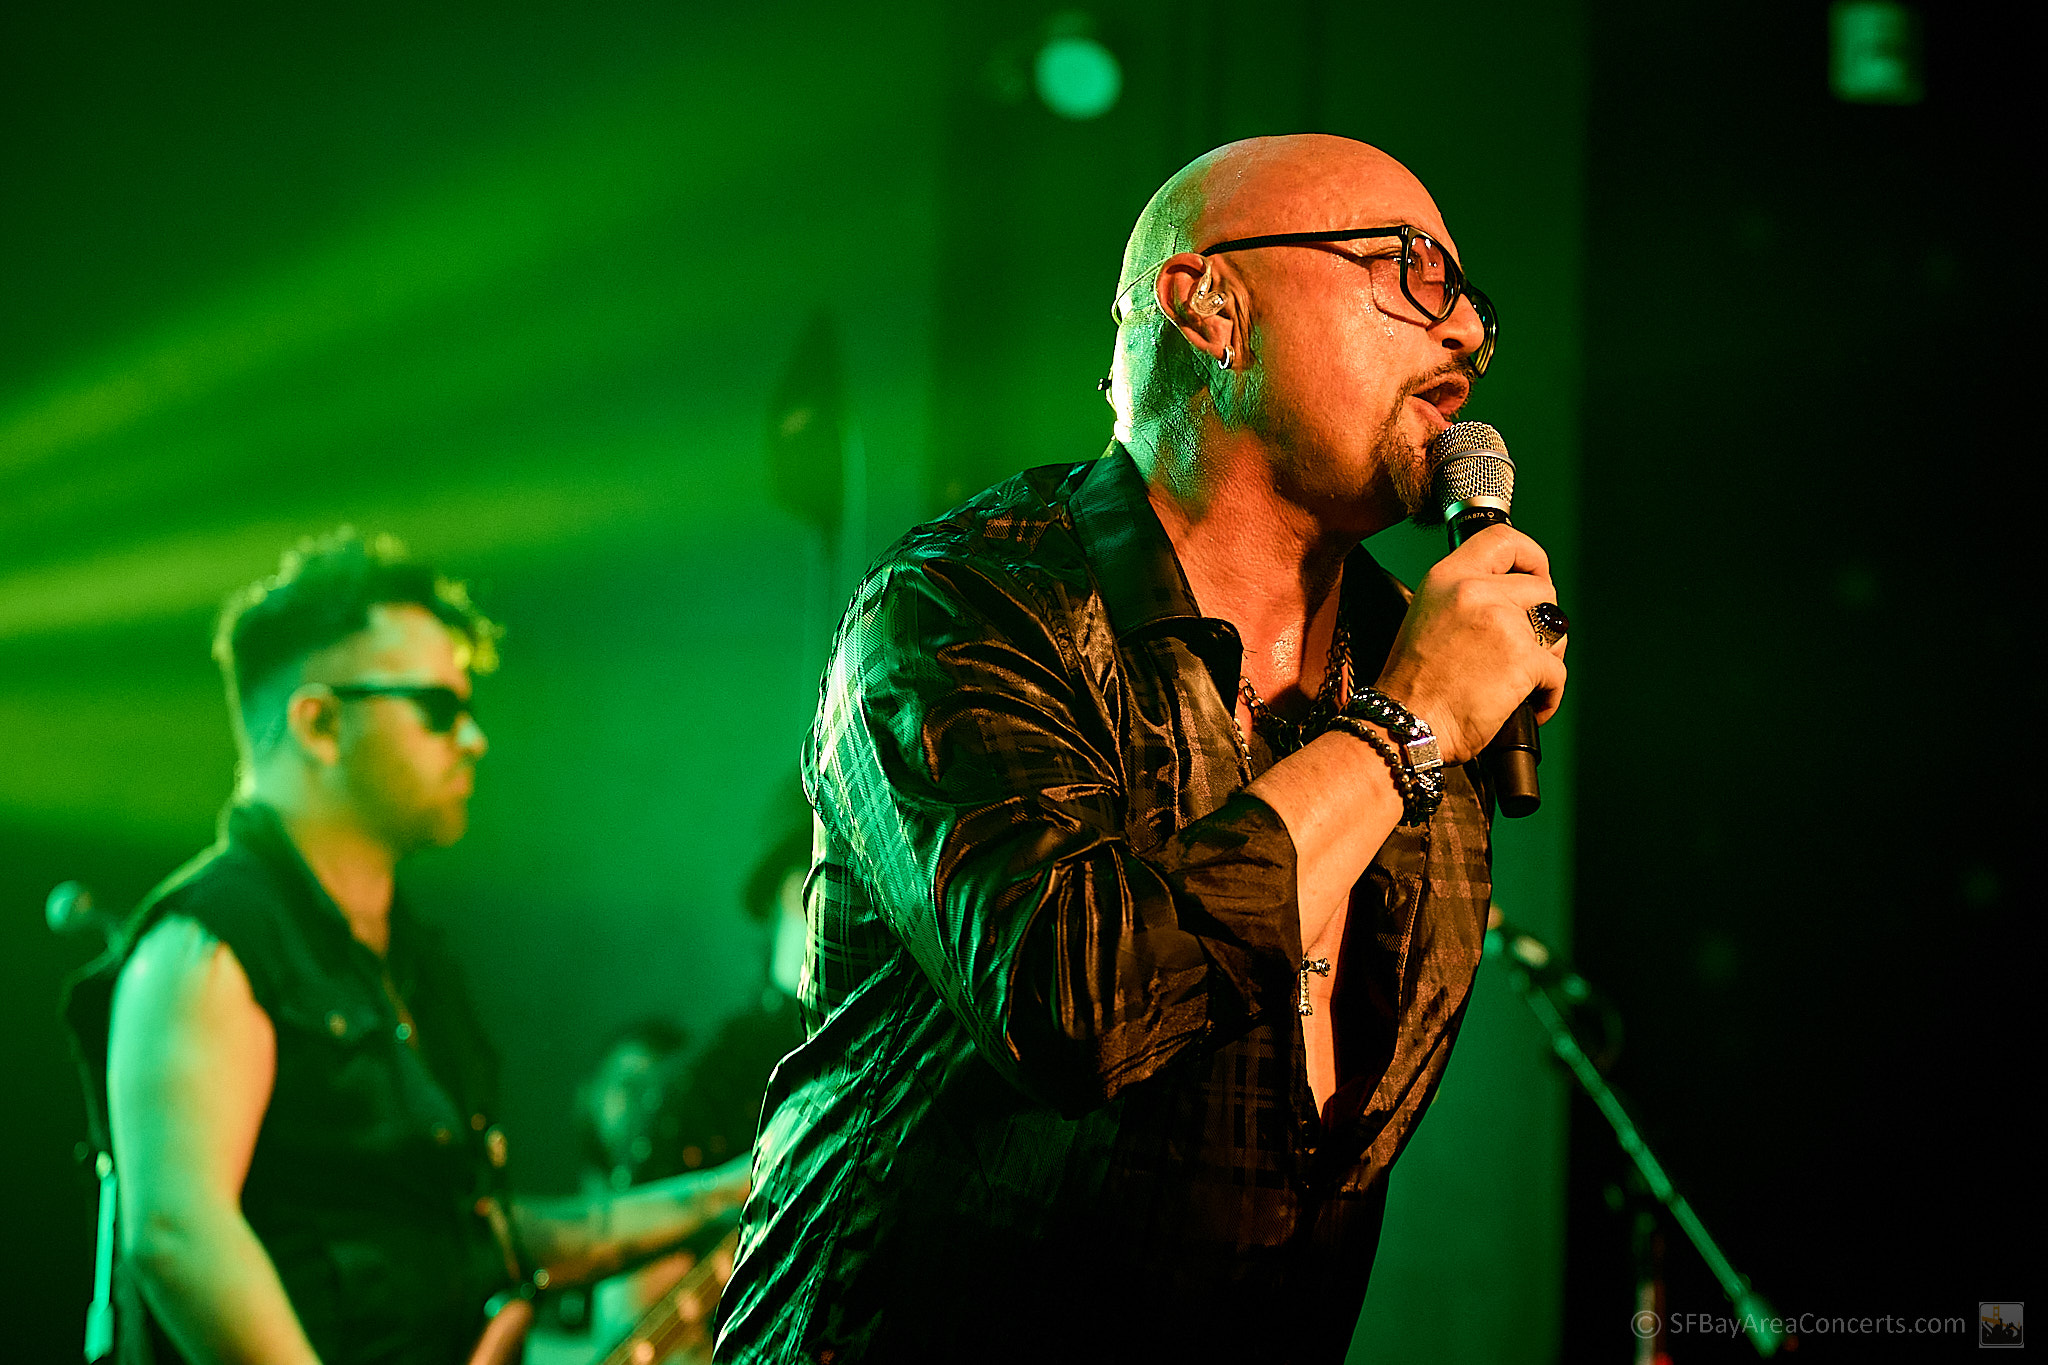 Geoff Tate @ the Ritz (Photo: Kevin Keating)